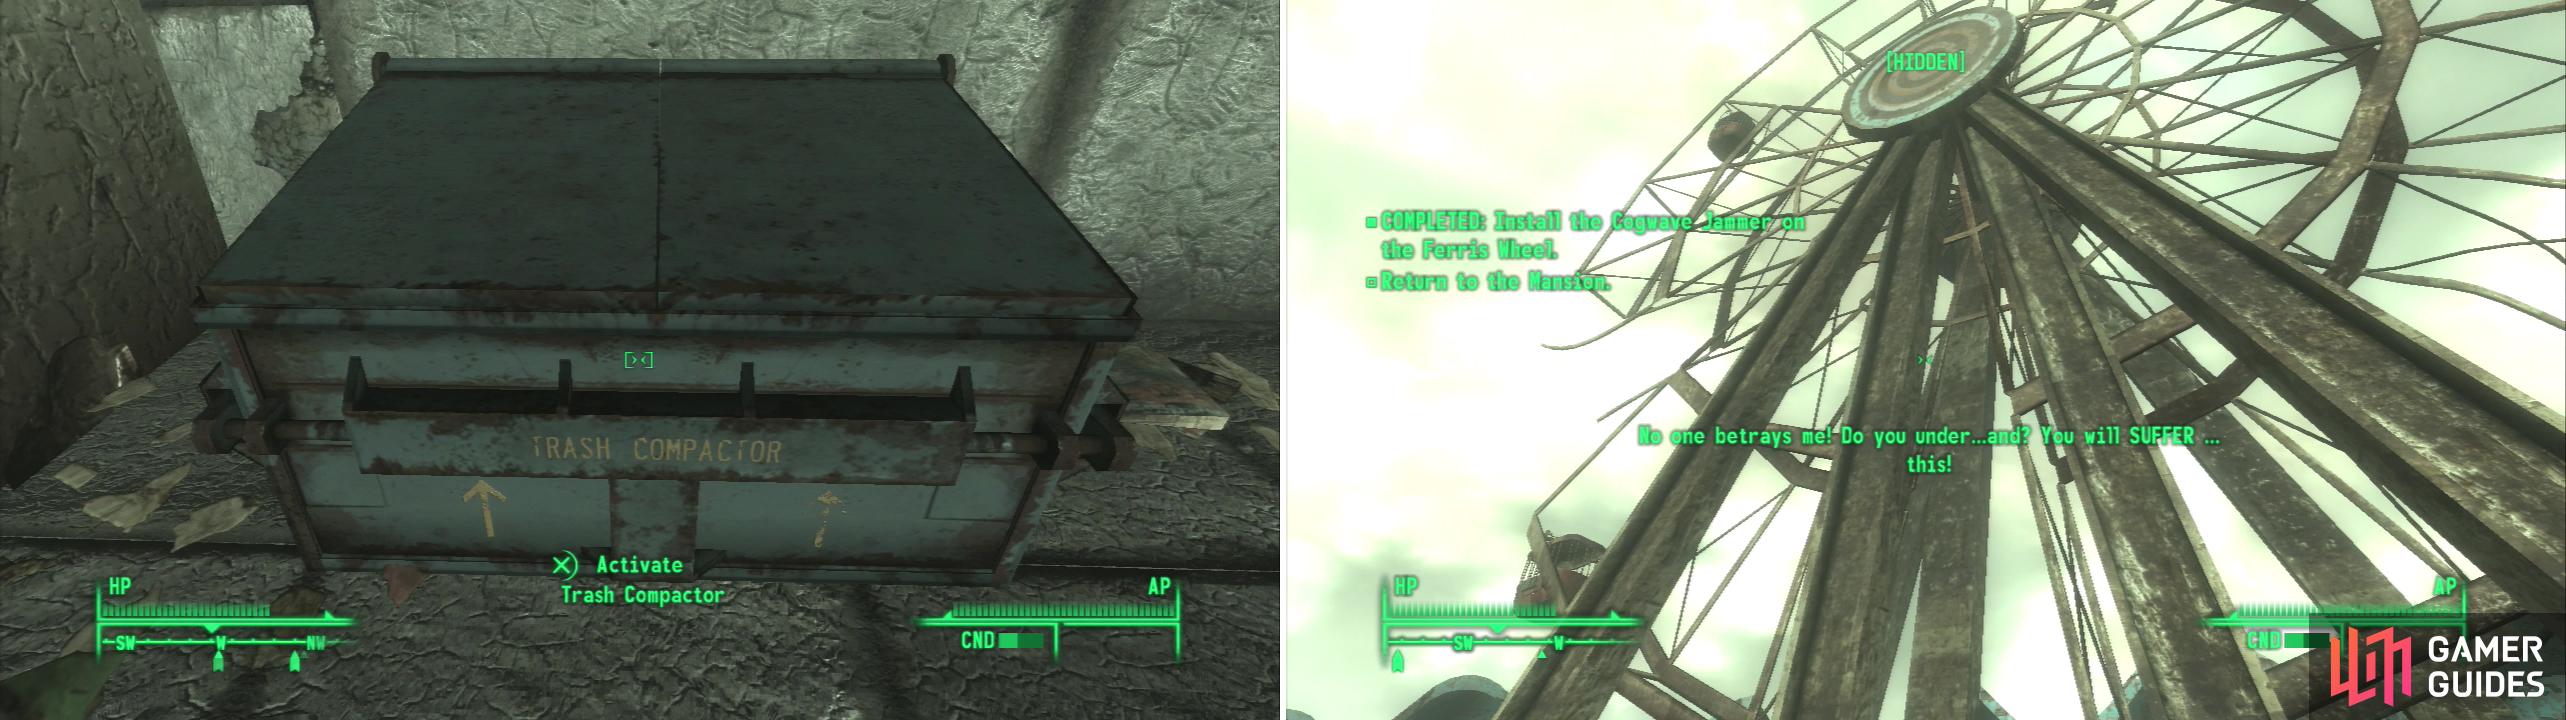 Either toss Desmond’s Cogwaver Jammer in the trash compactor to side with Calvert (left) or attach it to ferris wheel to disrupt Calvert’s control over the Tribals (right).